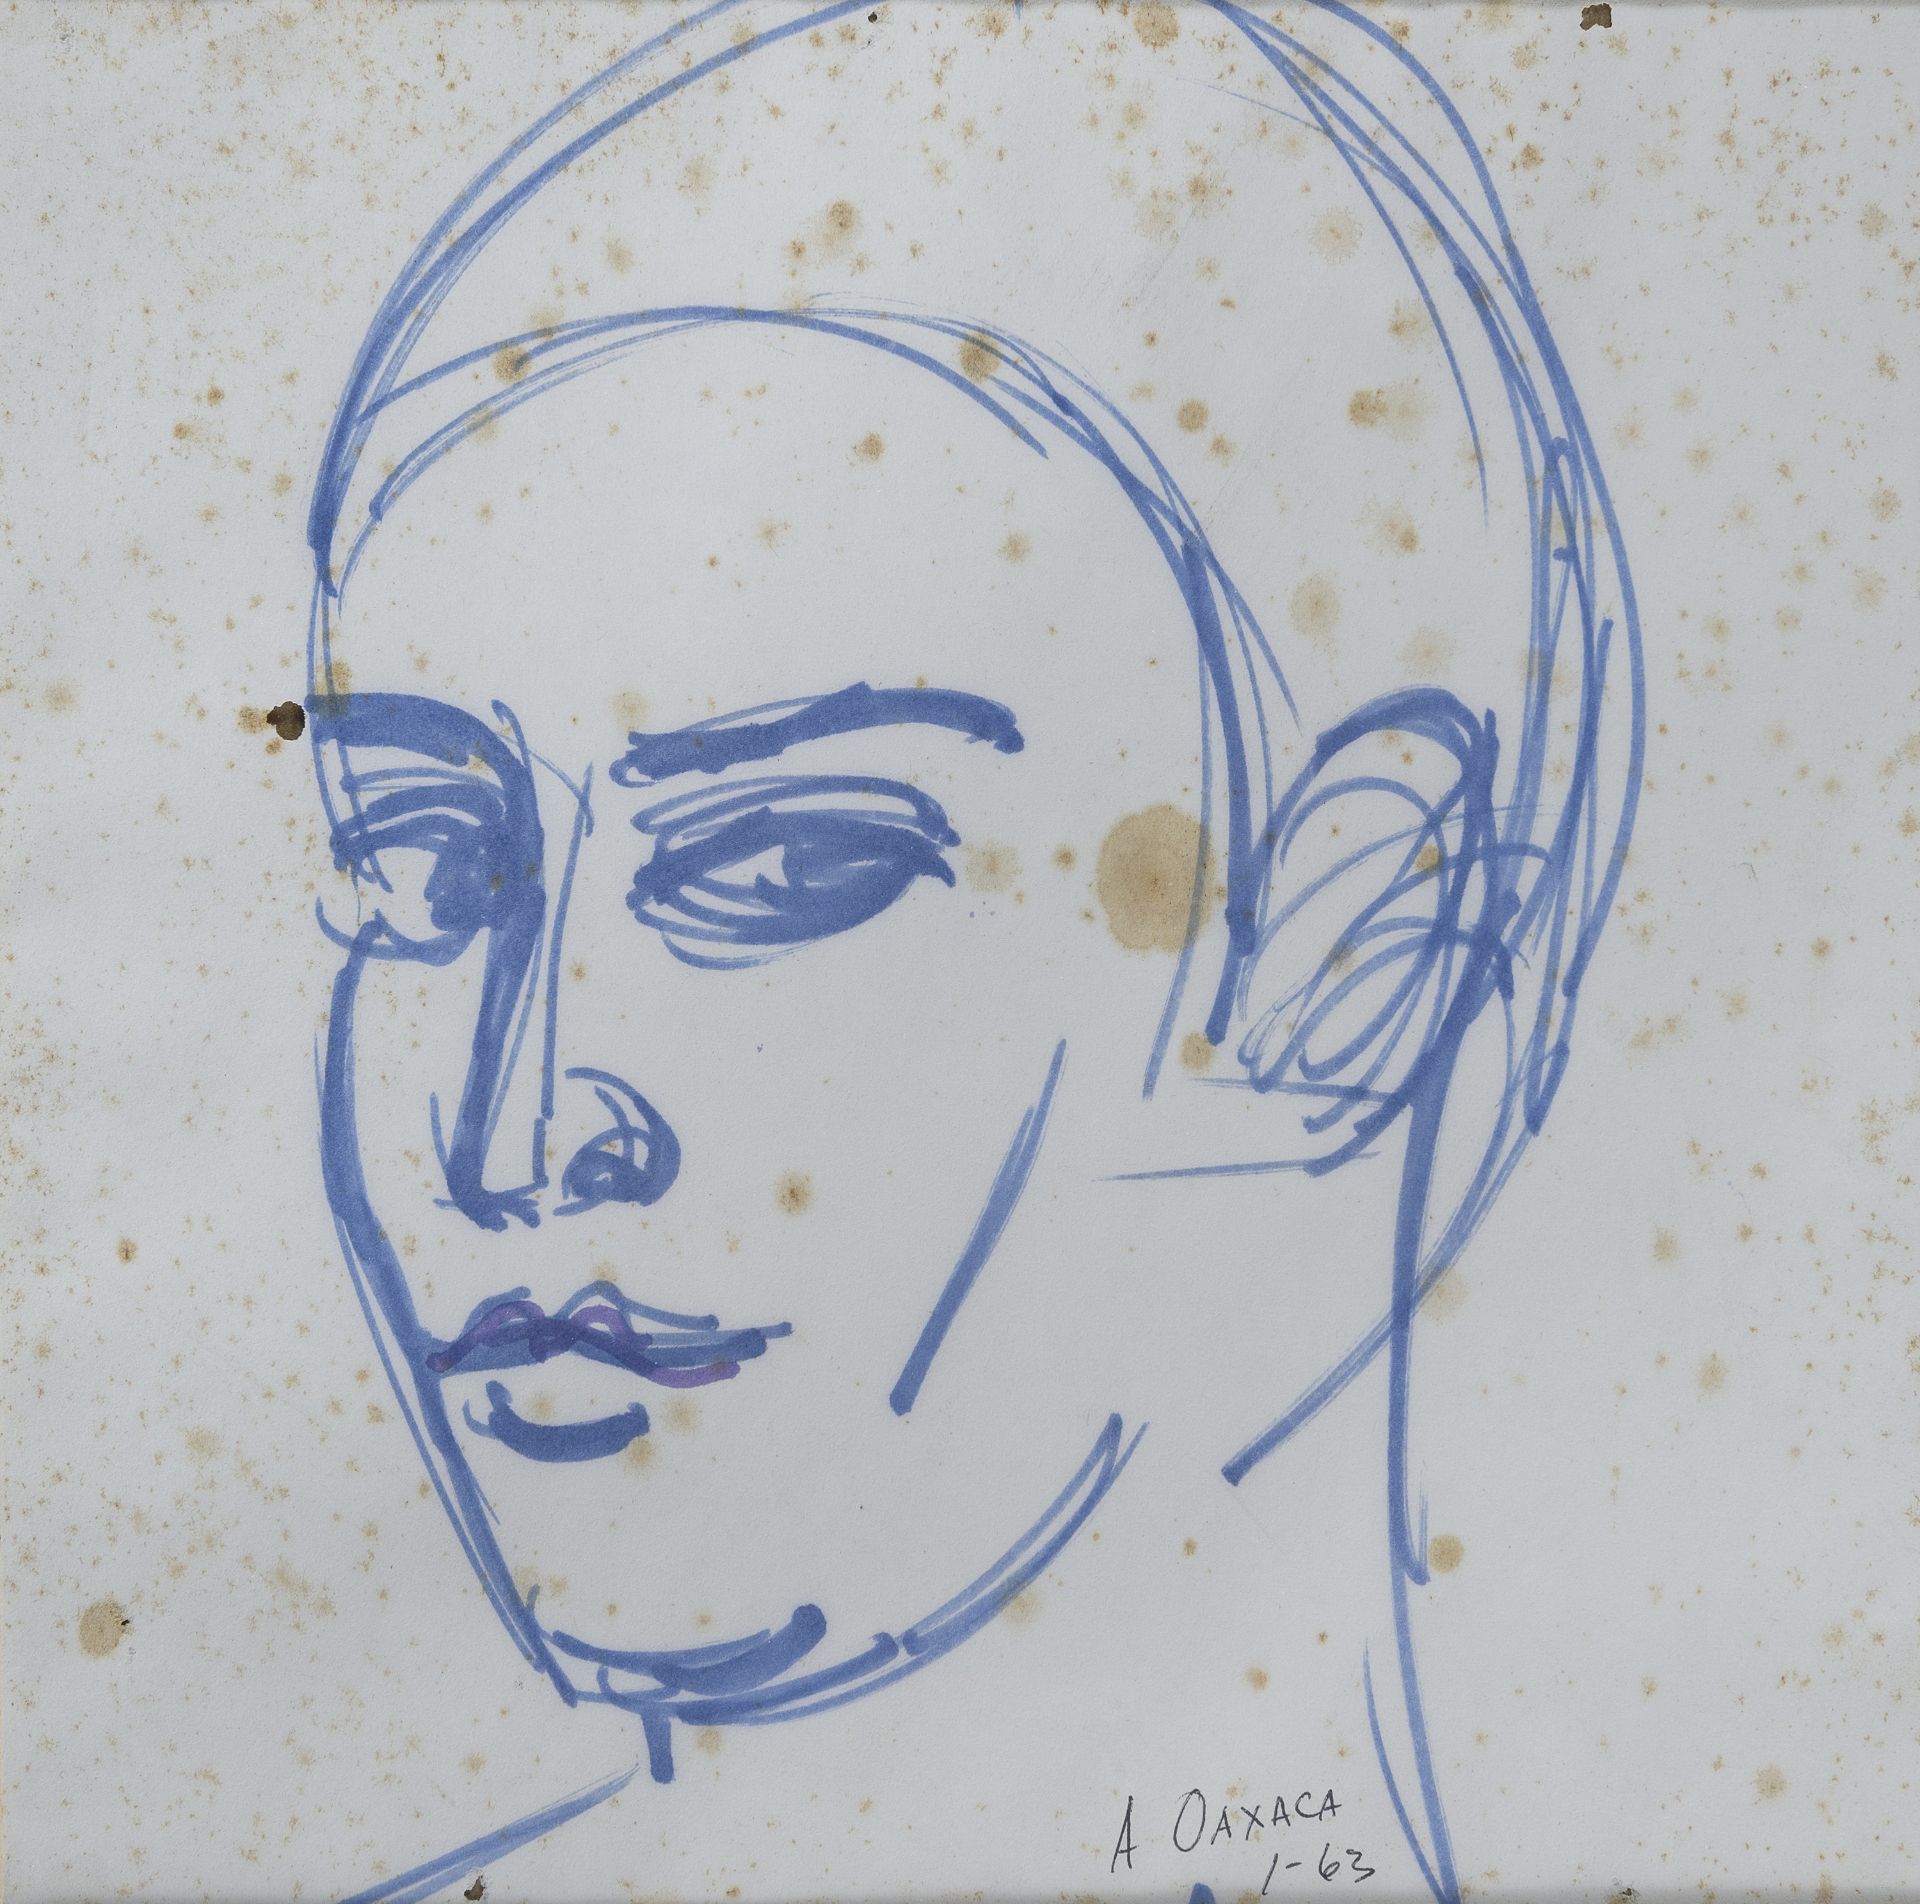 FELT PEN AND INK PORTRAIT OF A WOMAN BY ANTHONY QUINN 1963